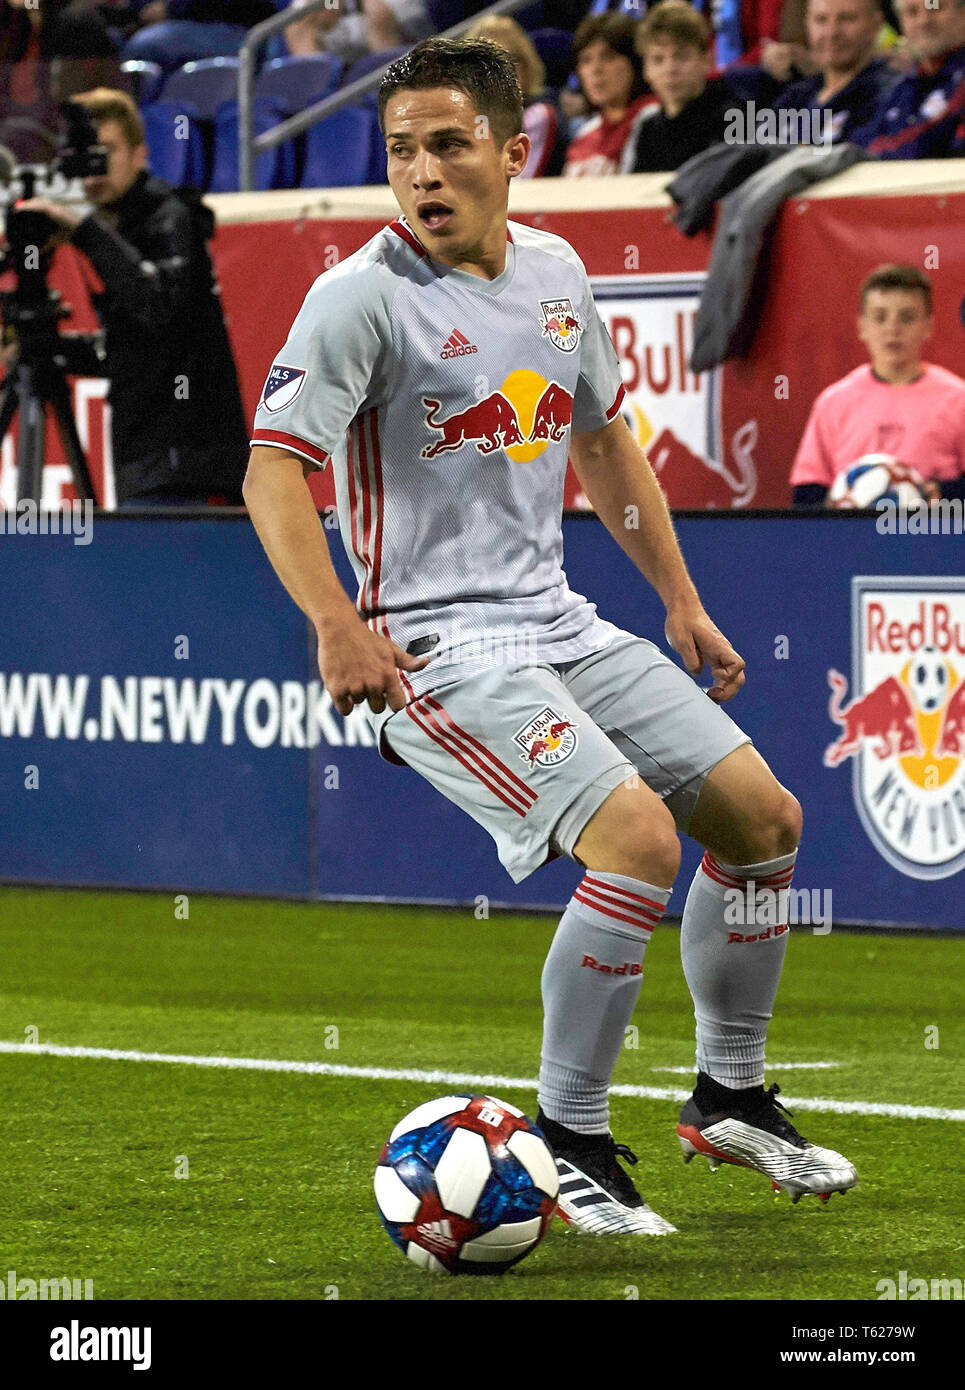 Harrison, New Jersey, USA. 27th Apr, 2019. New York Red Bulls defender  Connor Lade (5) in action during a MLS match between the FC Cincinnati and  the New York Red Bulls at